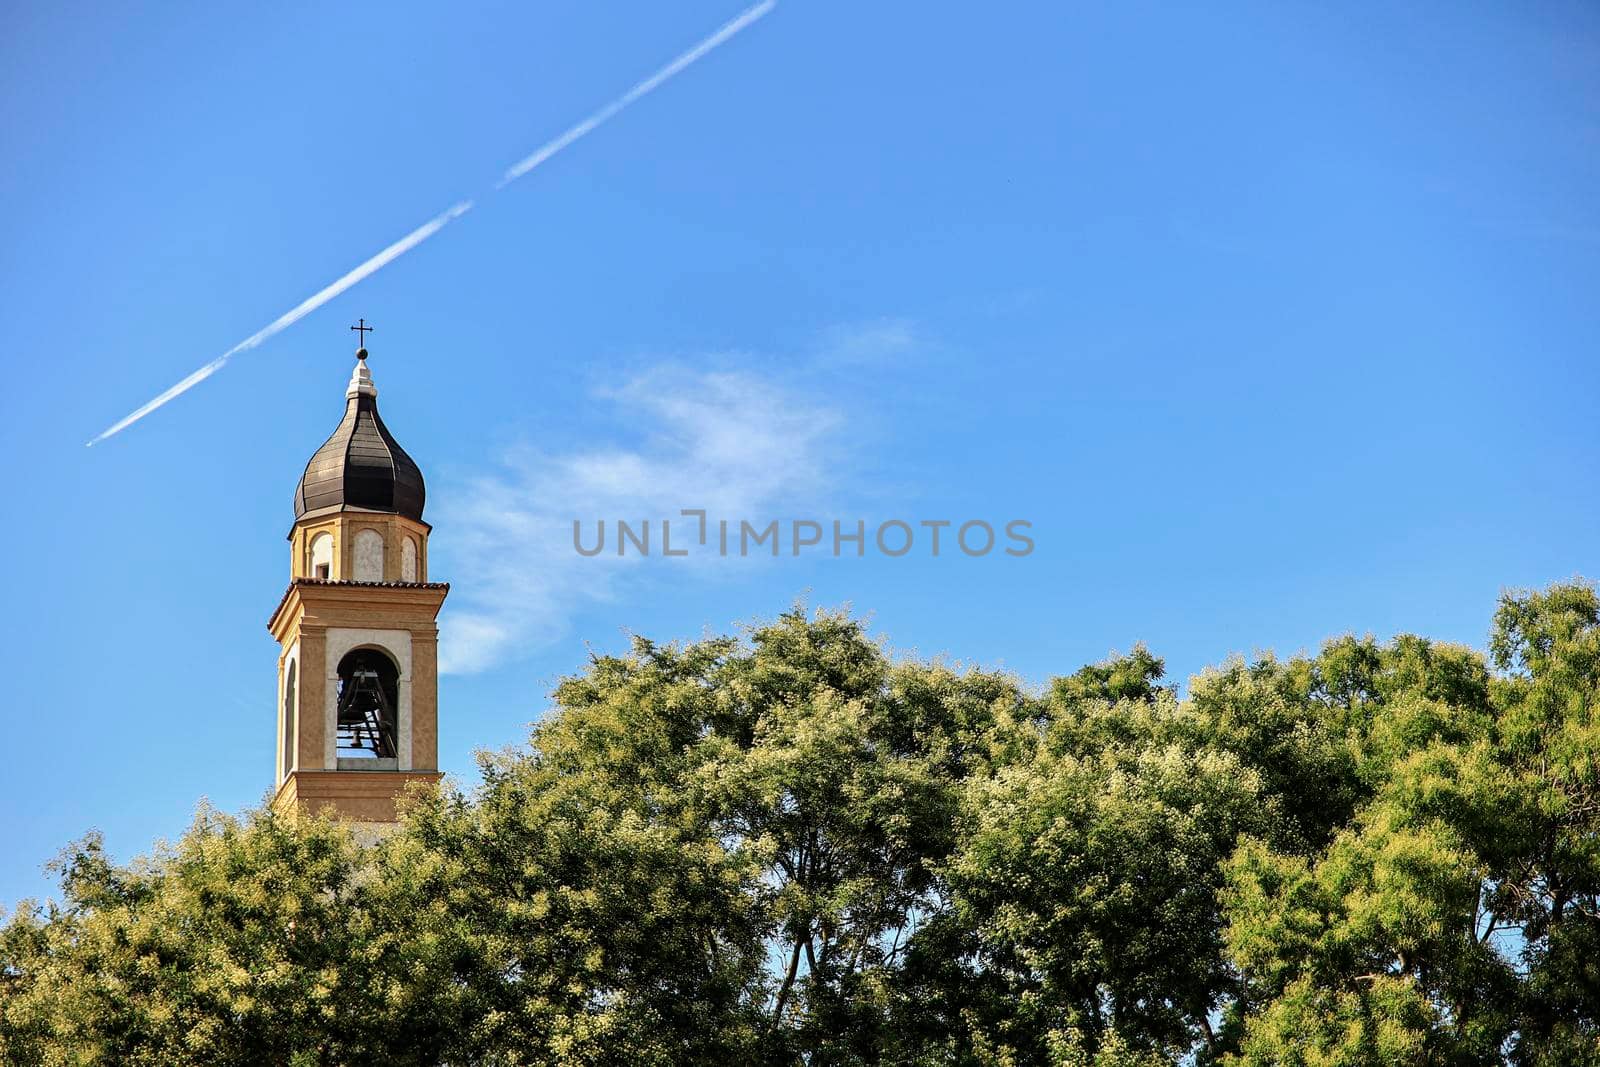 Church bell tower in the trees by pippocarlot